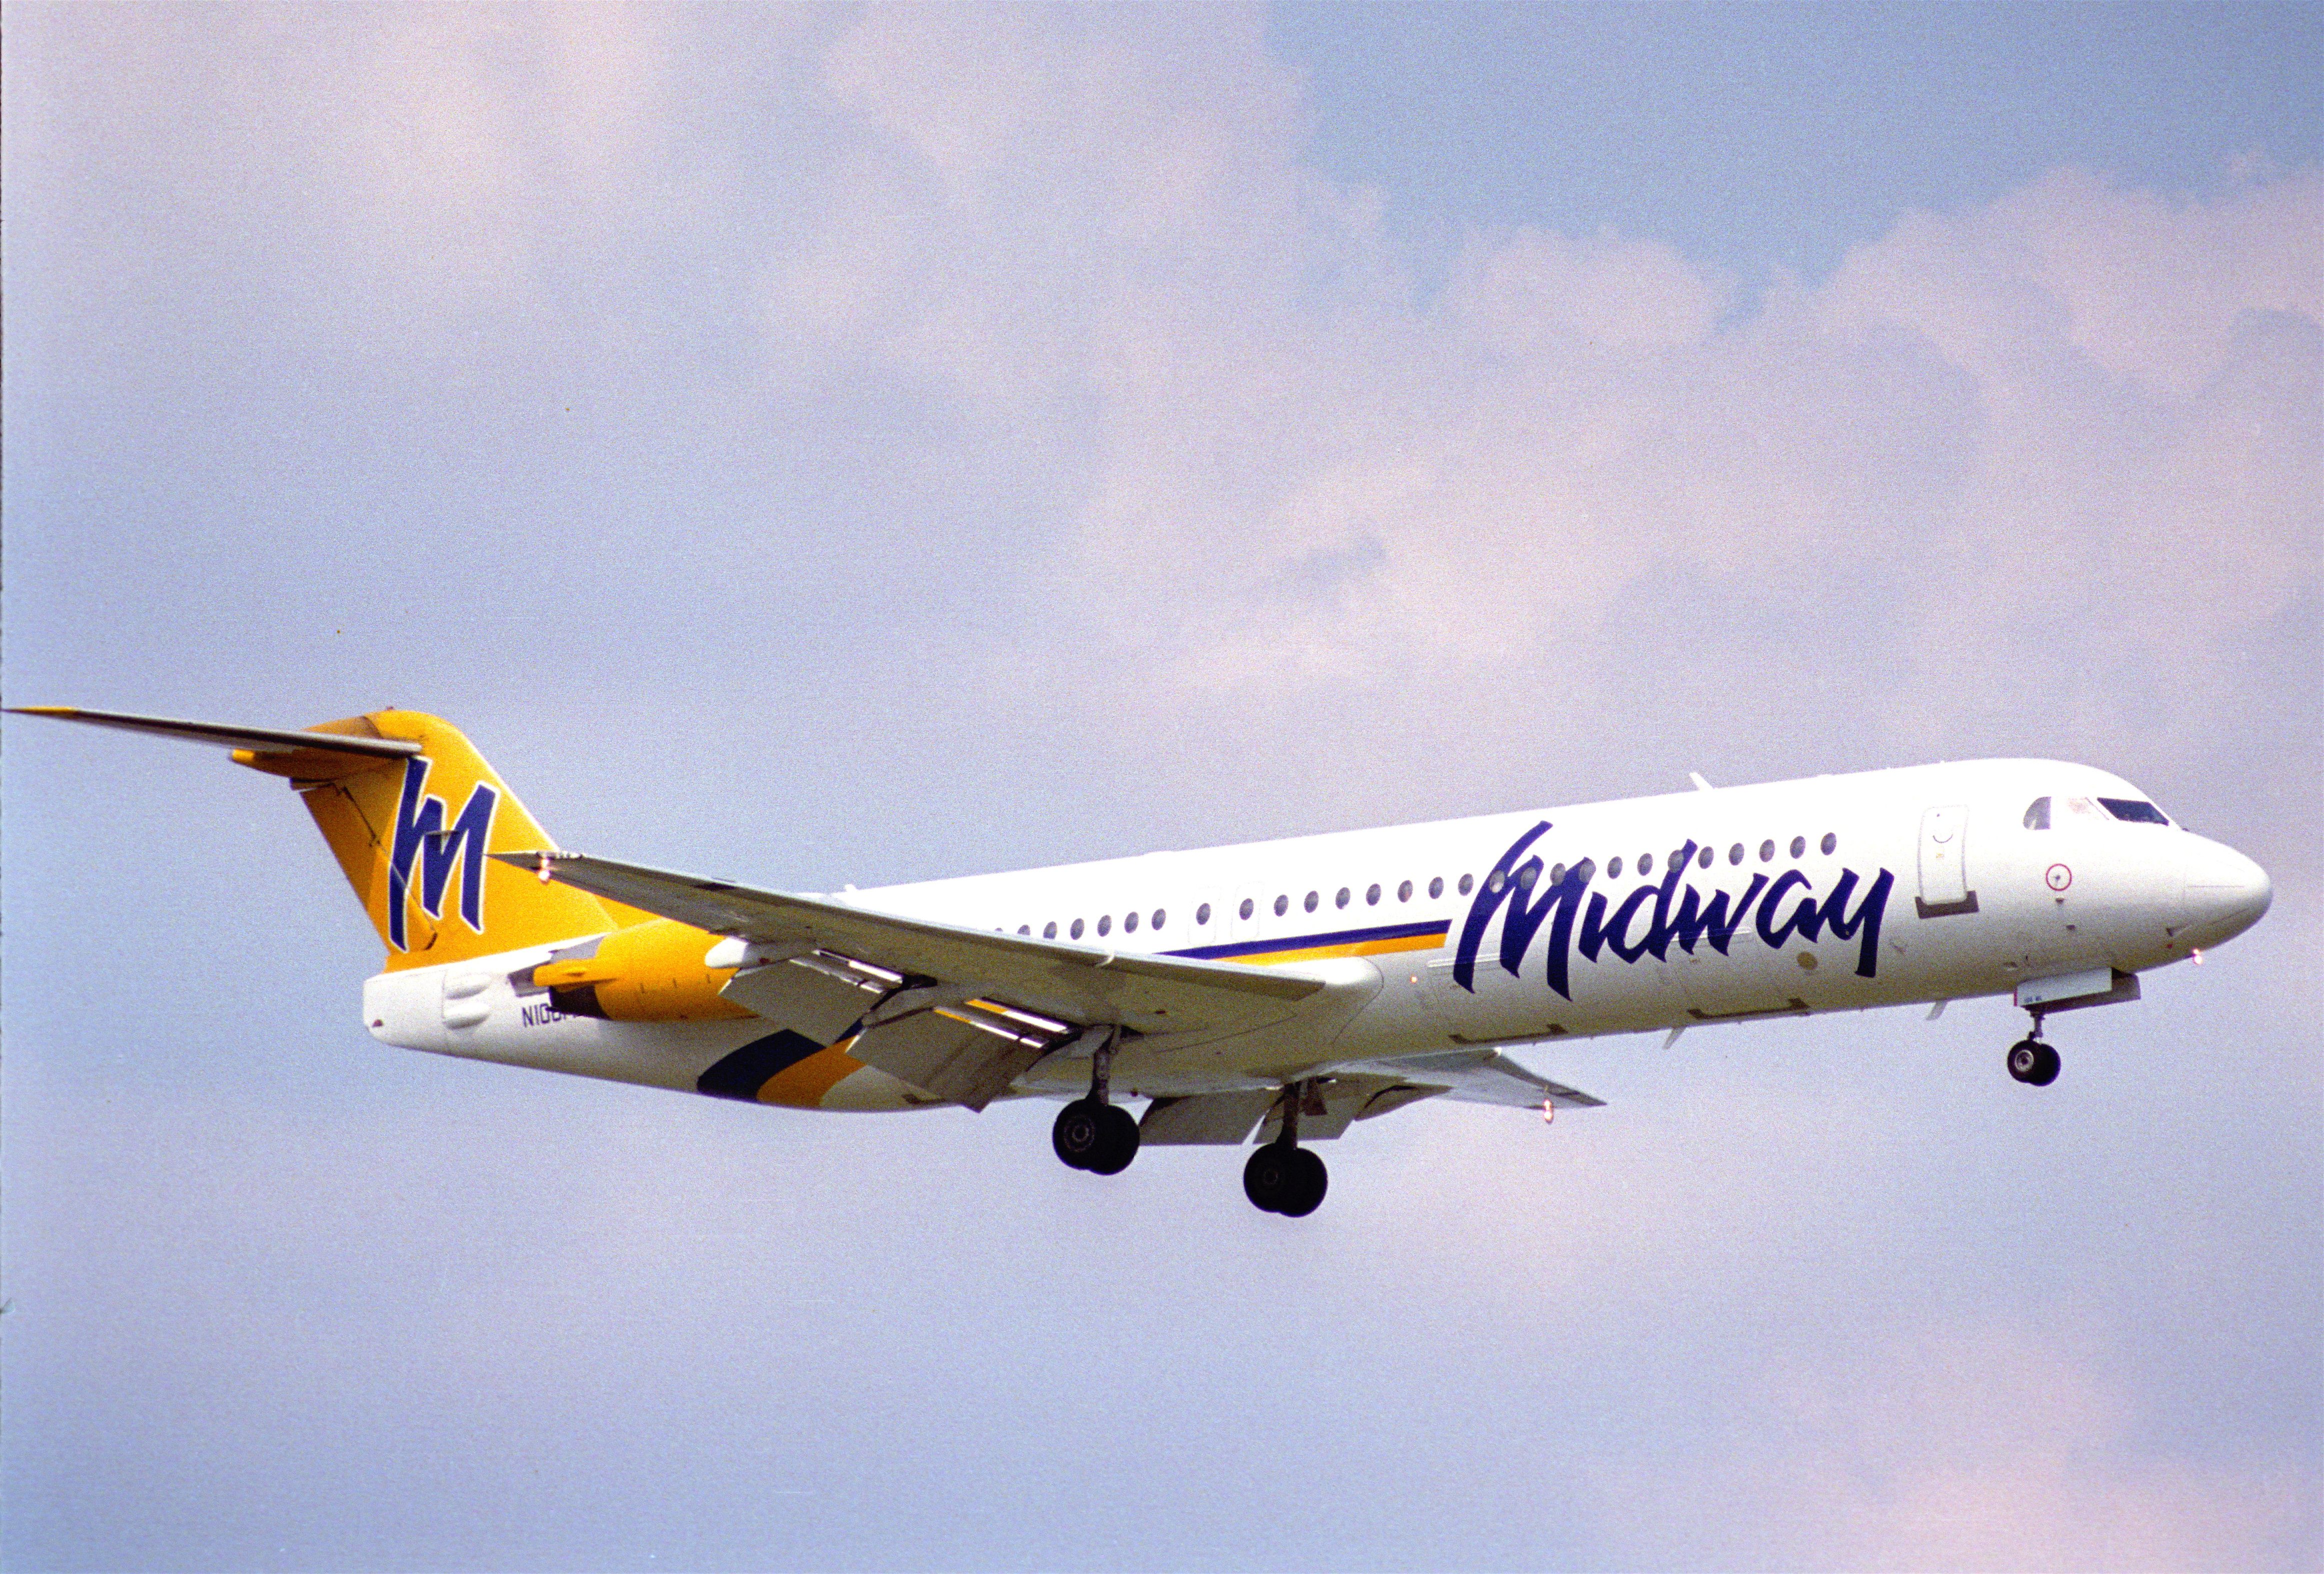 Midway Airlines aircraft